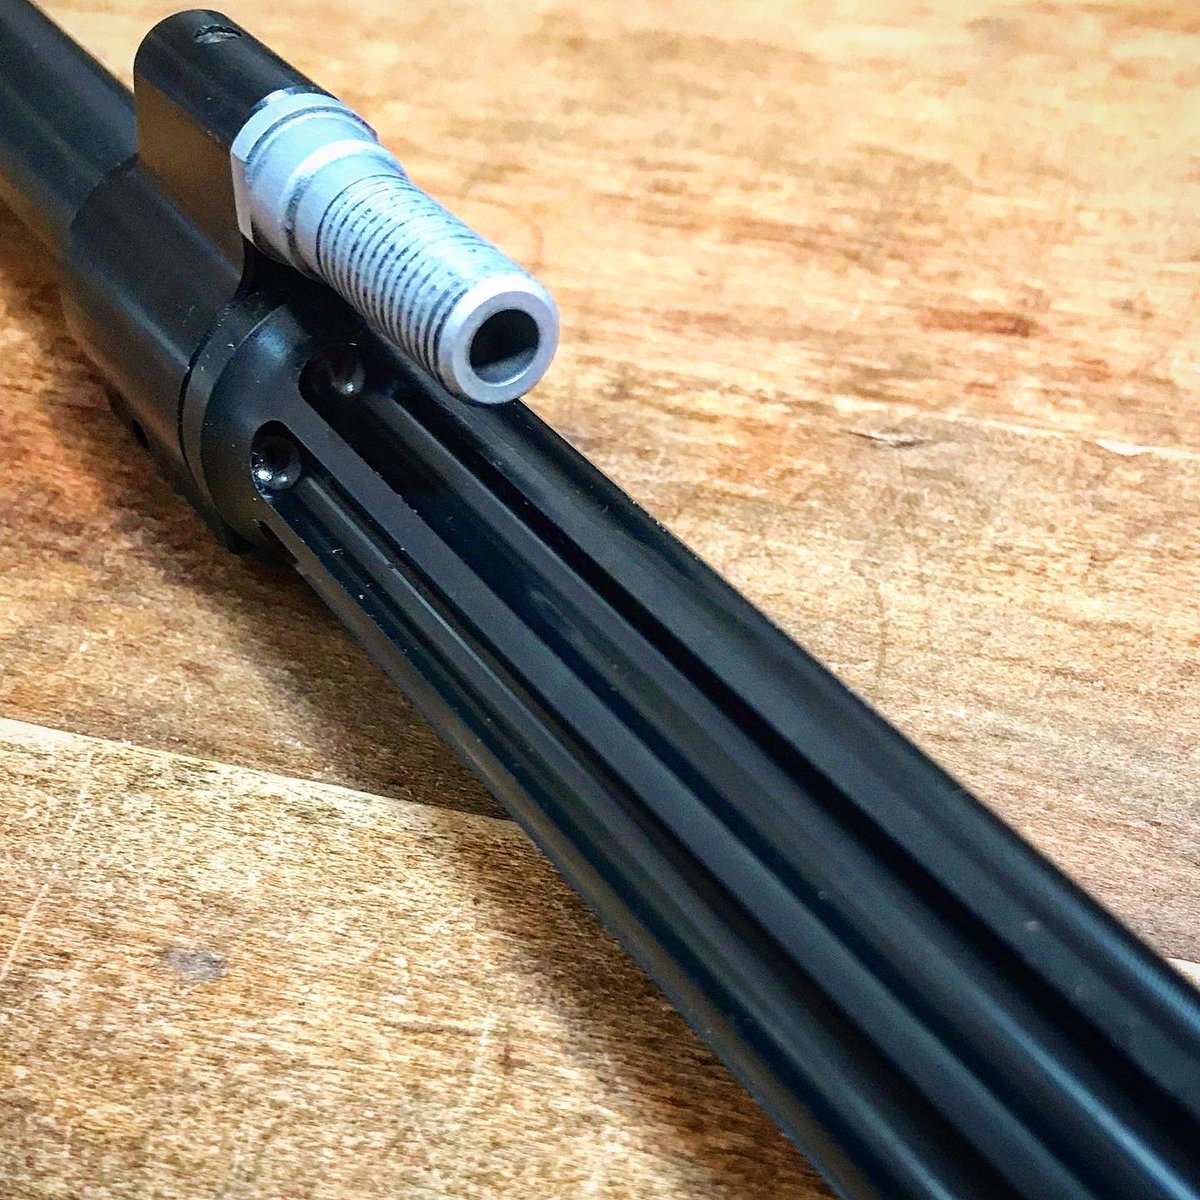 MARKFIVE Monday. A look at the Combat Match Barrel. Designed to provide optimum rigidity and enhanced cooling capabilities, while being as light as possible, without compromising the above. The design gives long barrel life & outstanding accuracy. leitner-wise.com